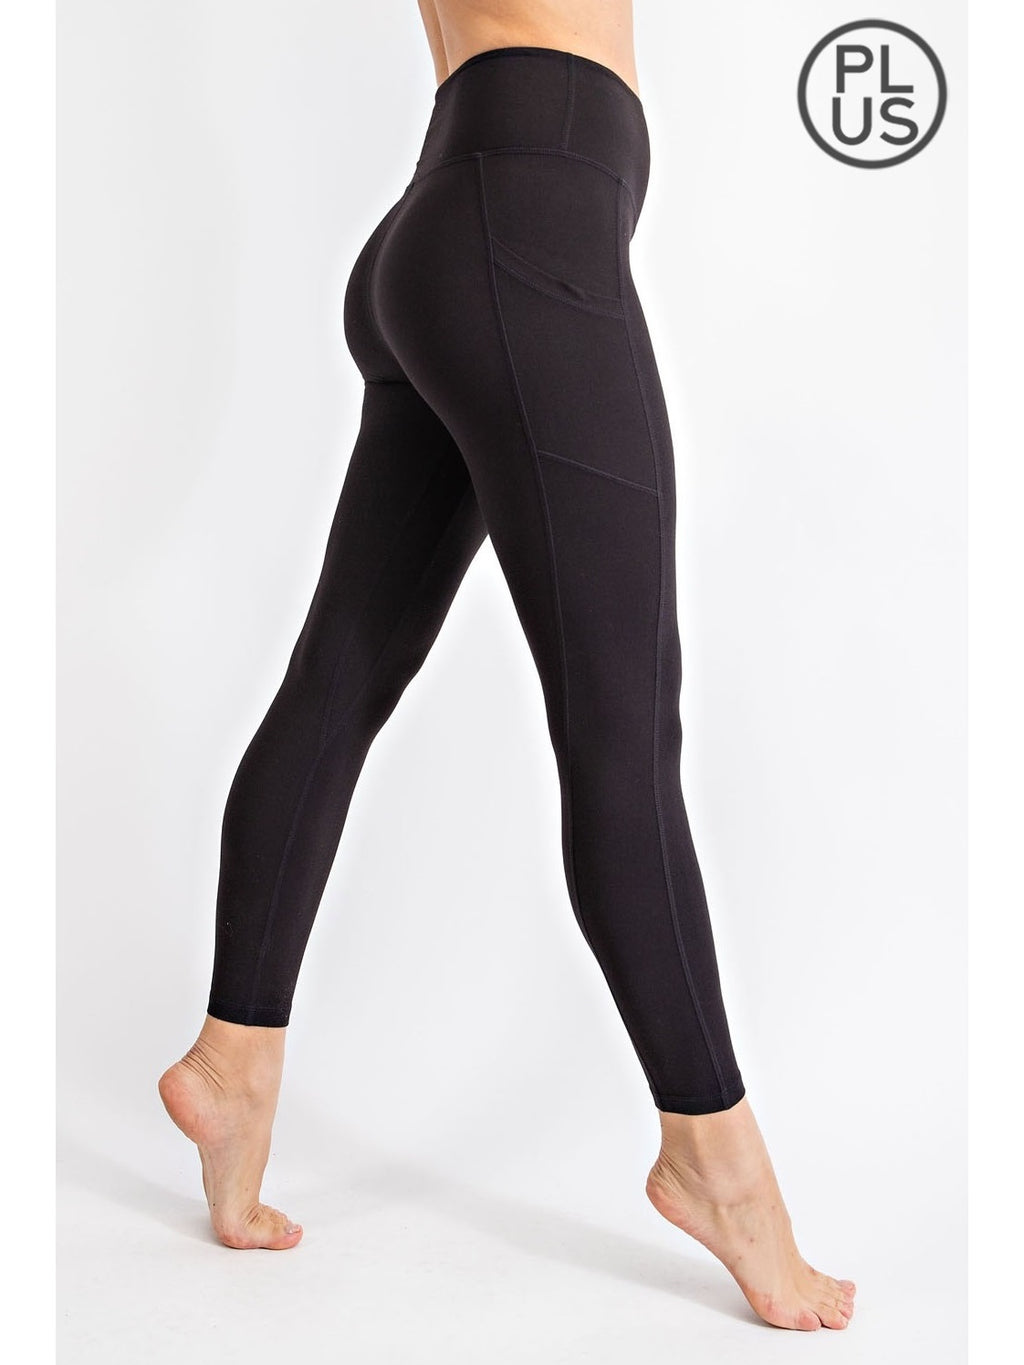 Seize The Day Leggings with Pockets - 6 Colors!, By Alexa Rae Boutique